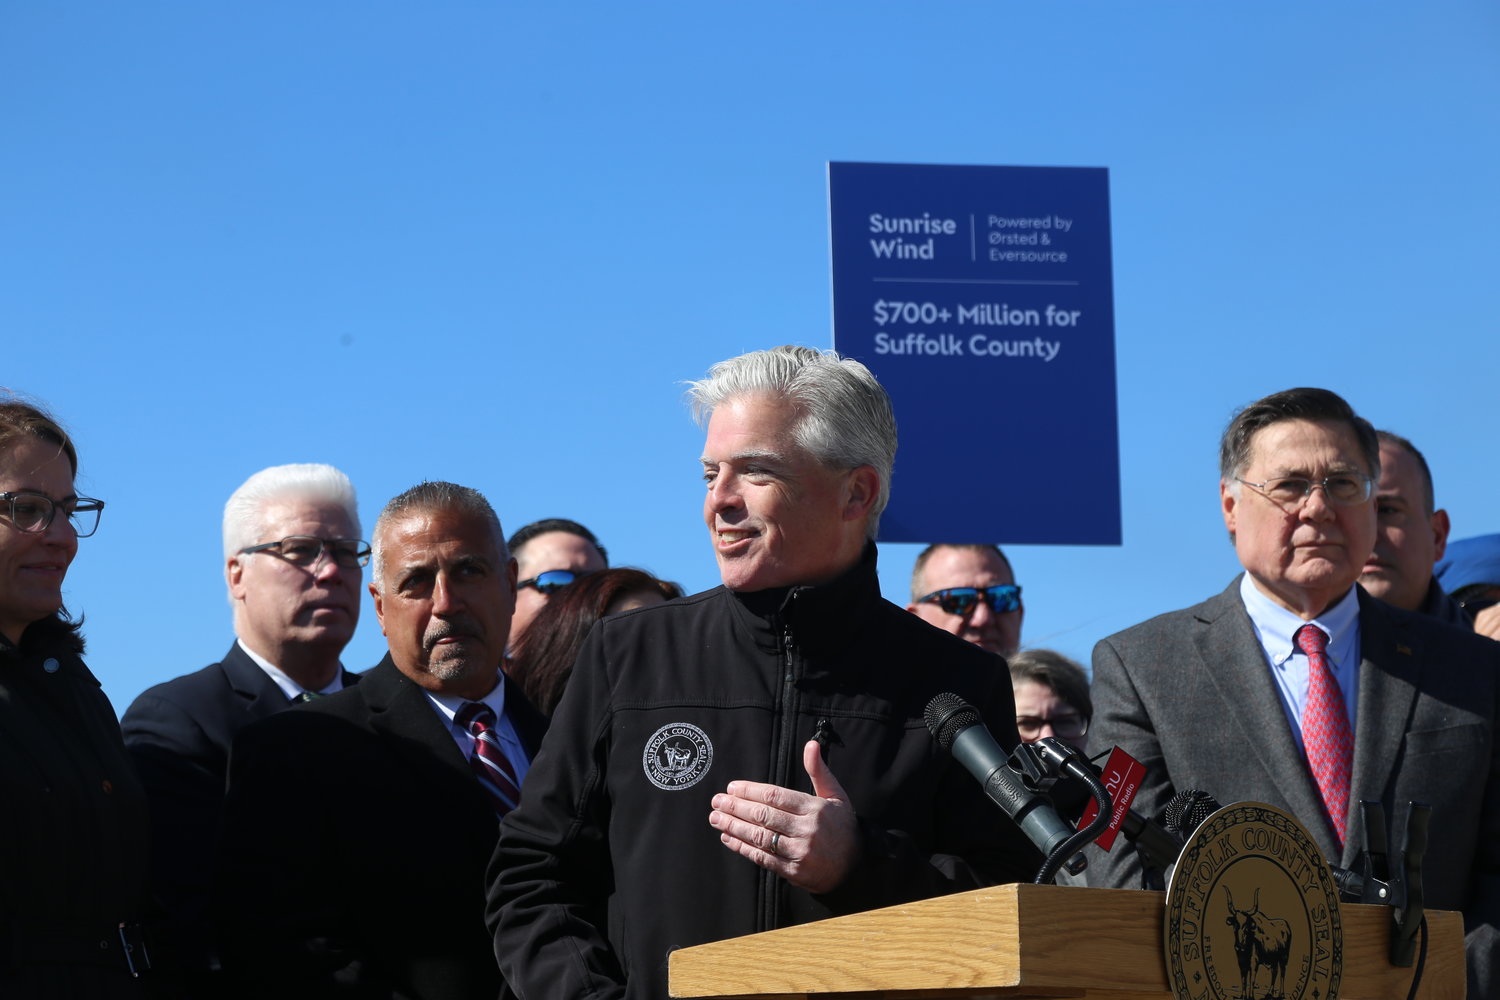 County executive Steve Bellone and town supervisor Ed Romaine speak about the wind project.